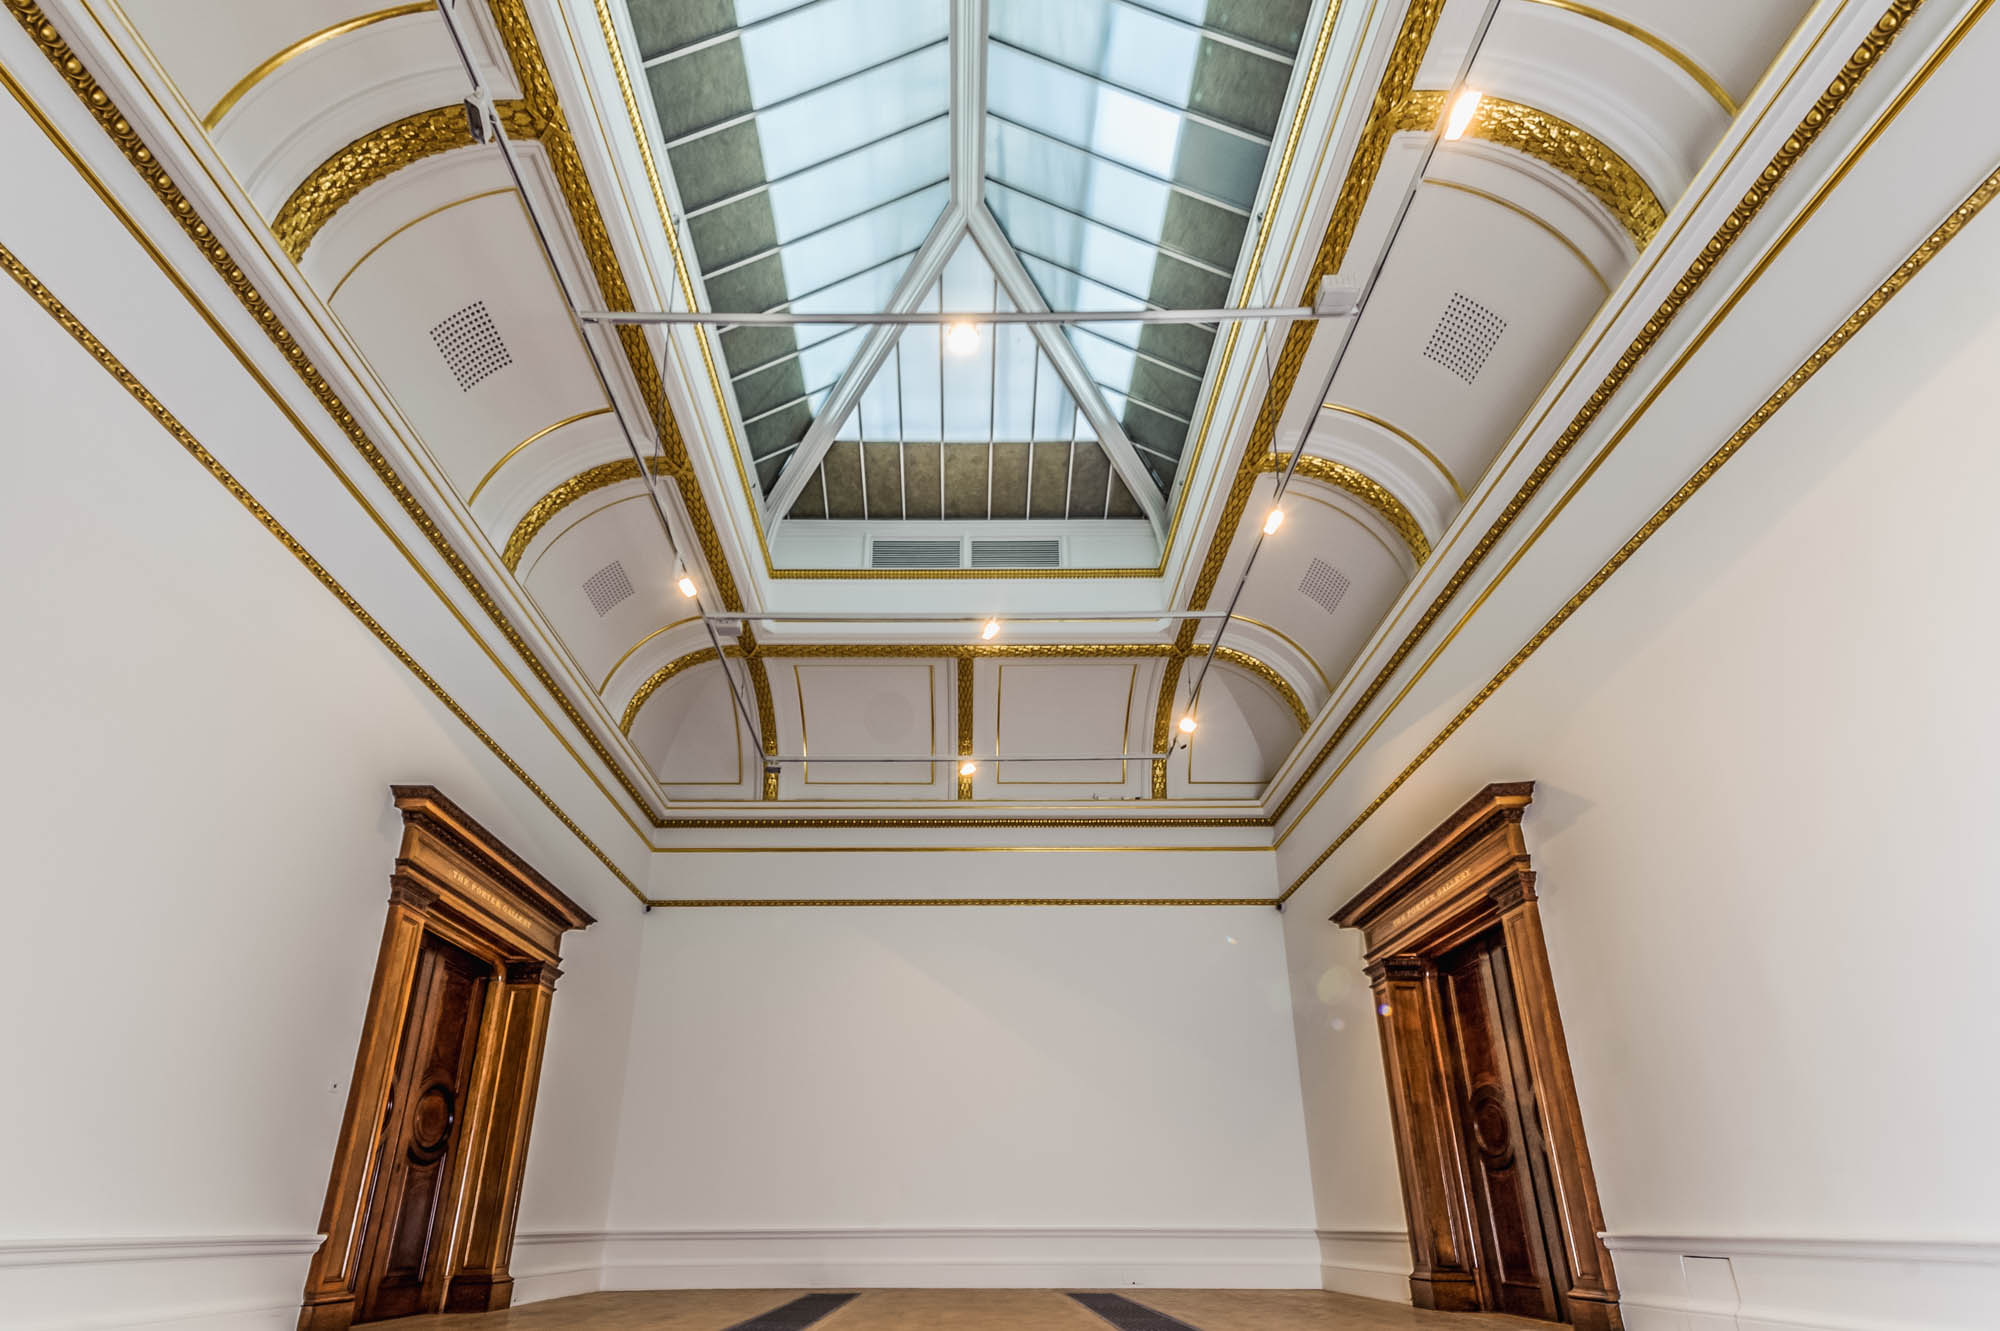 A photo of the interior of a gallery at the royal academy of arts